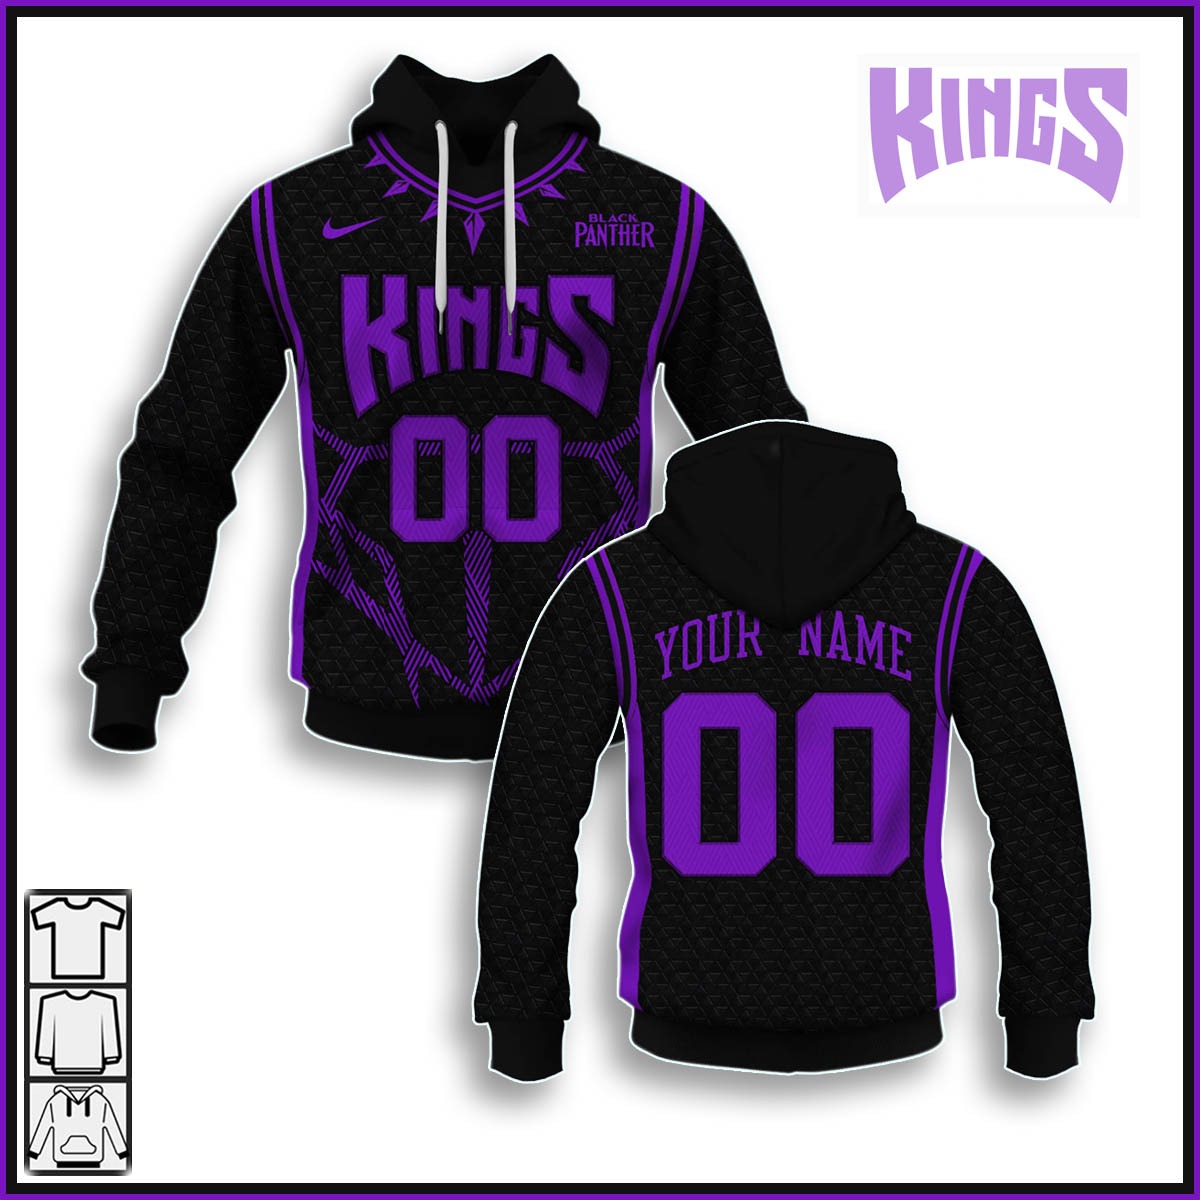 Sacramento Kings x Black Panther jersey concept designed by @srelix on  Instagram. Cop or drop? : r/kings